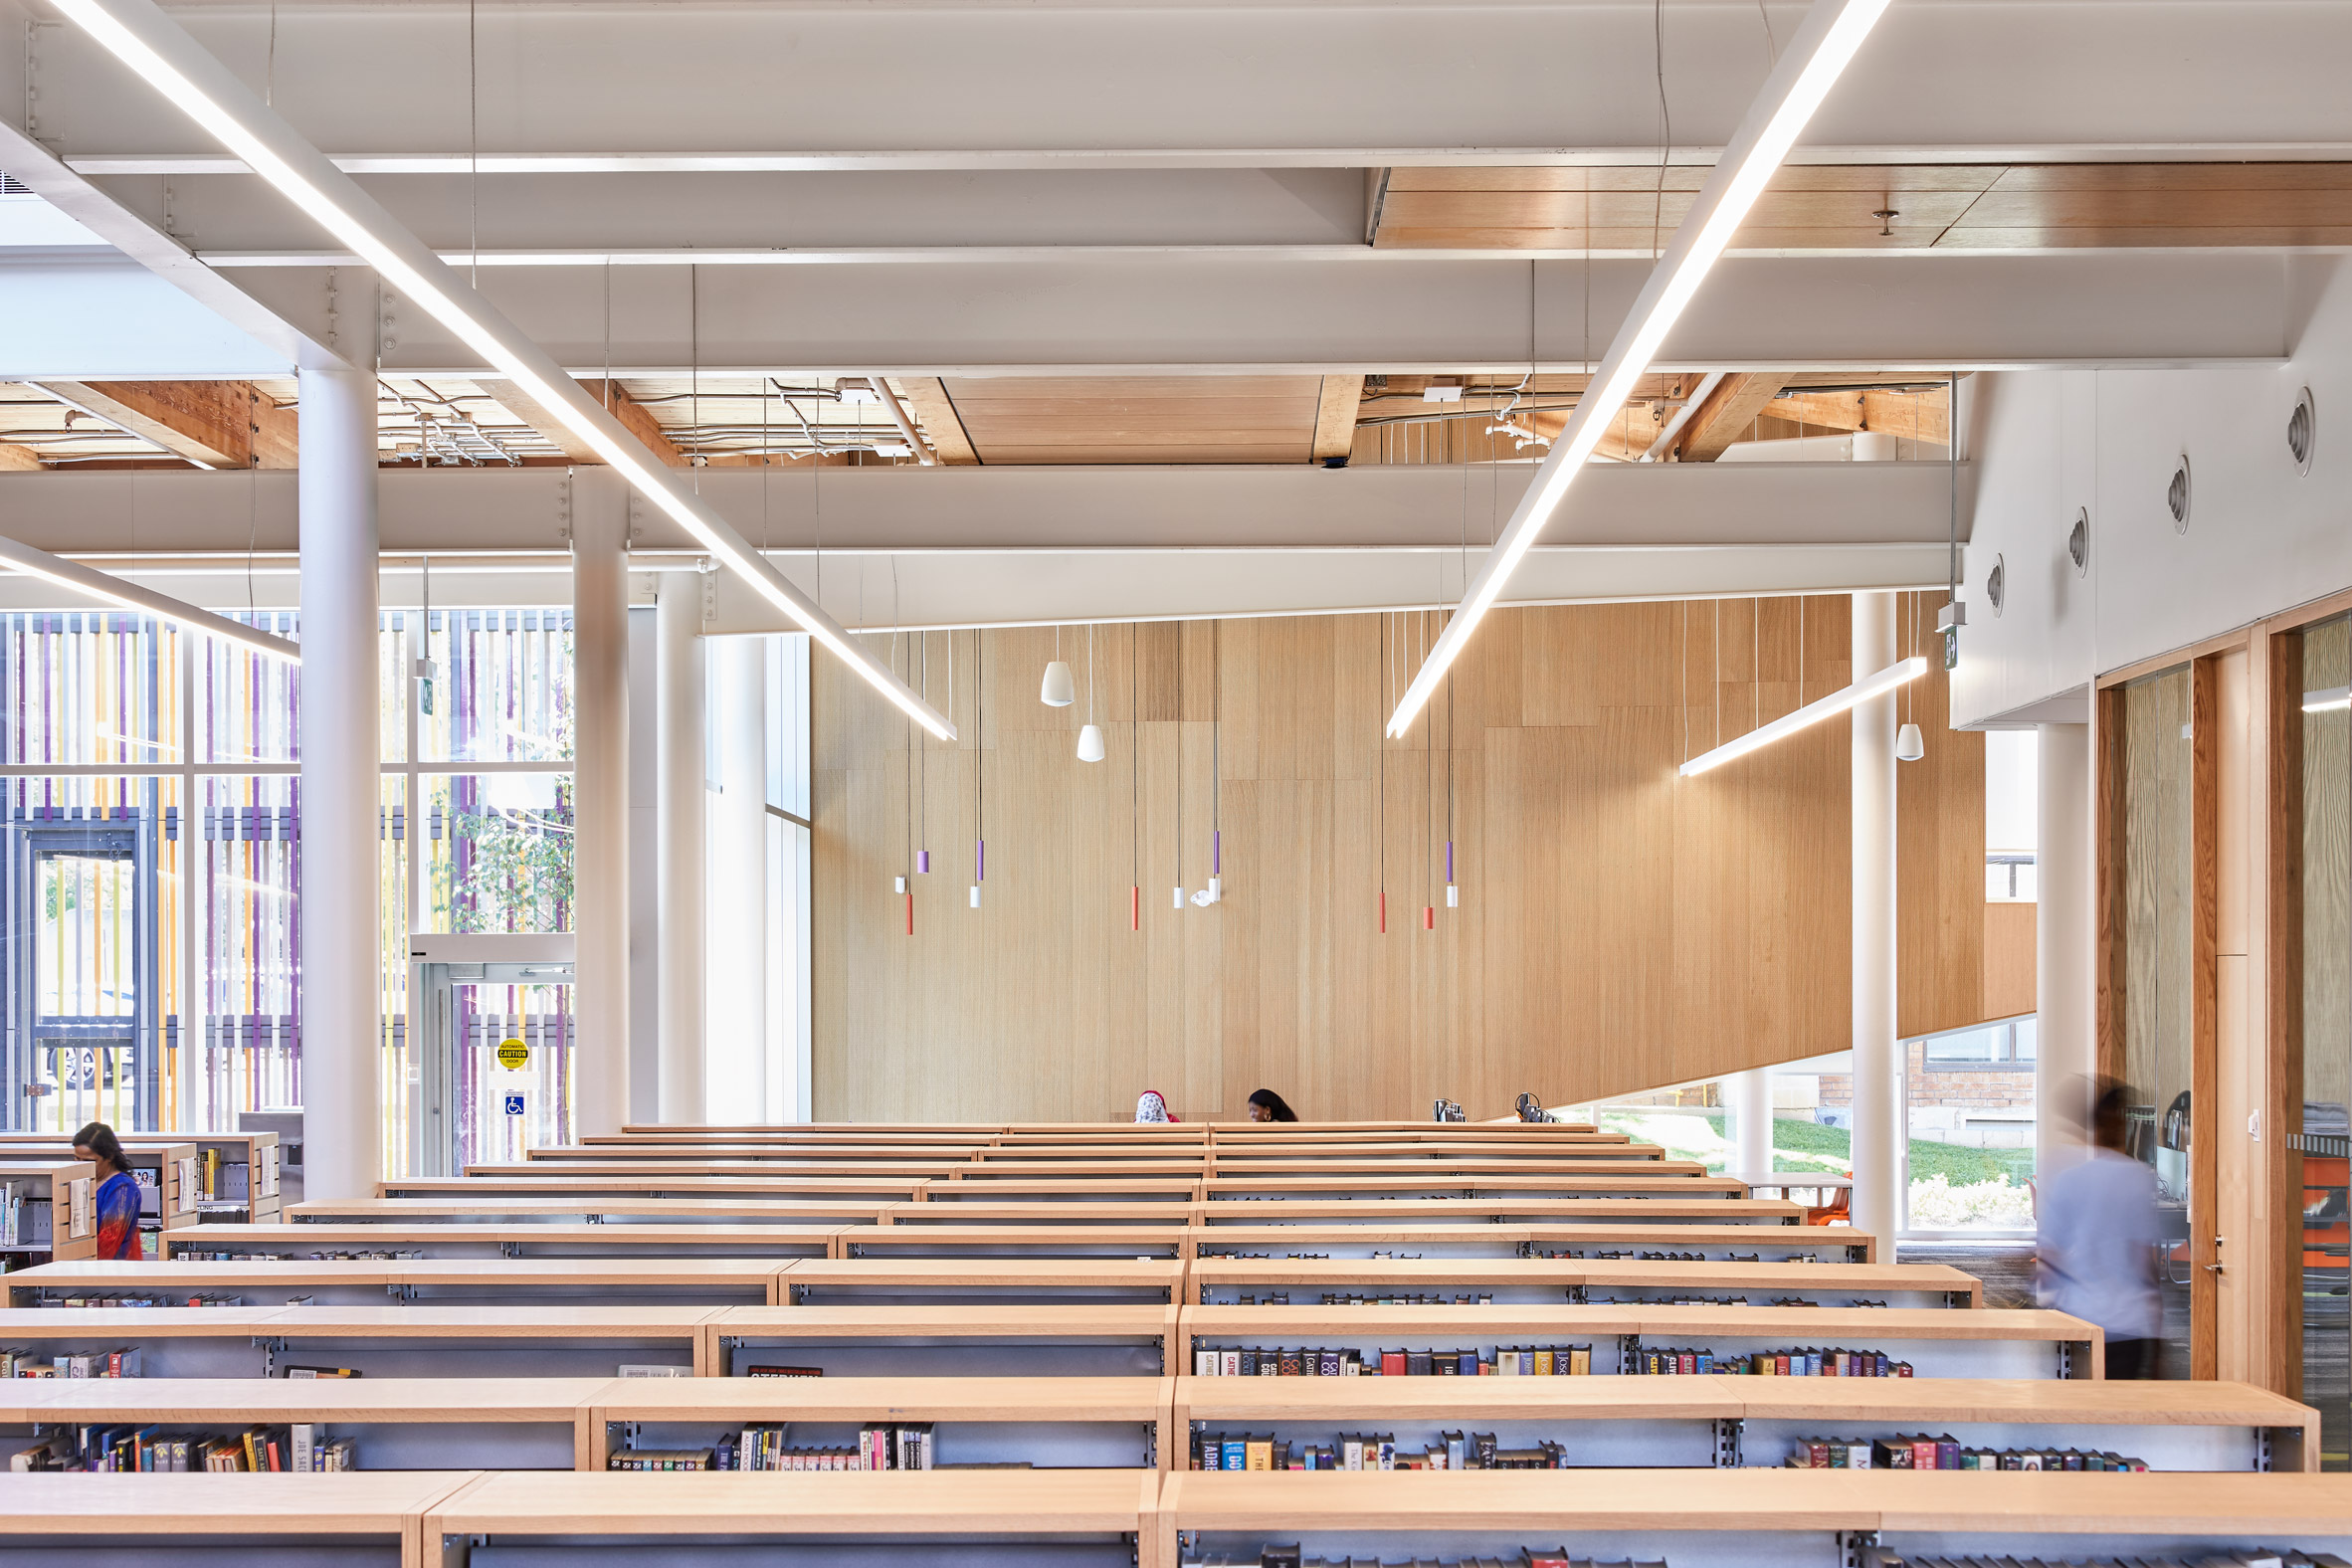 Albion Library by Perkins+Will